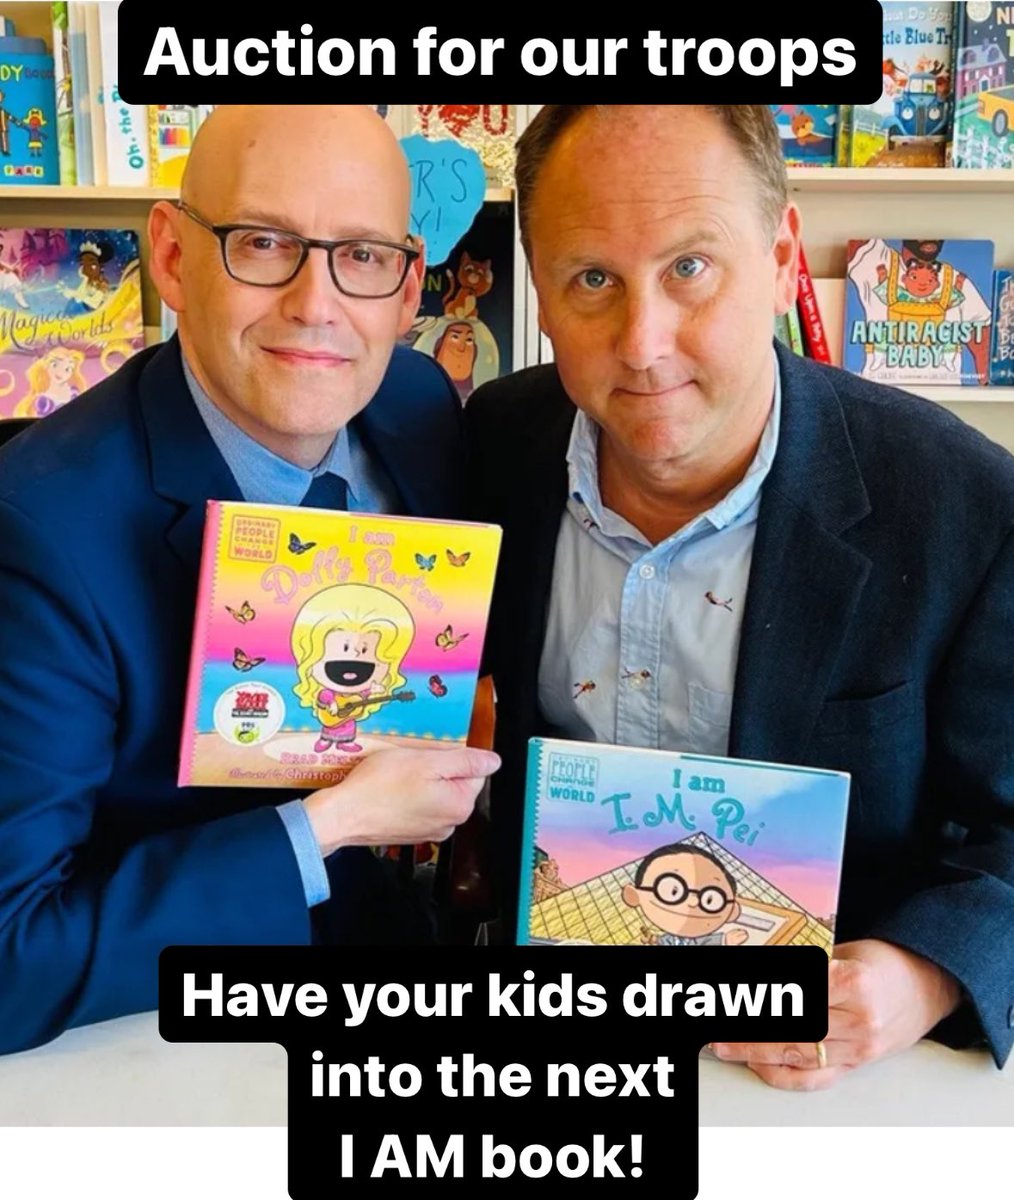 Your children could be drawn by @ChrisEliopoulos and included in the next Ordinary People Change the World children’s book series! Bid now until Nov 13 during the @homesforourtrps annual Veterans Day @Ebay Celebrity Auction: ebay.com/itm/2761246050… #HFOTAuction2023